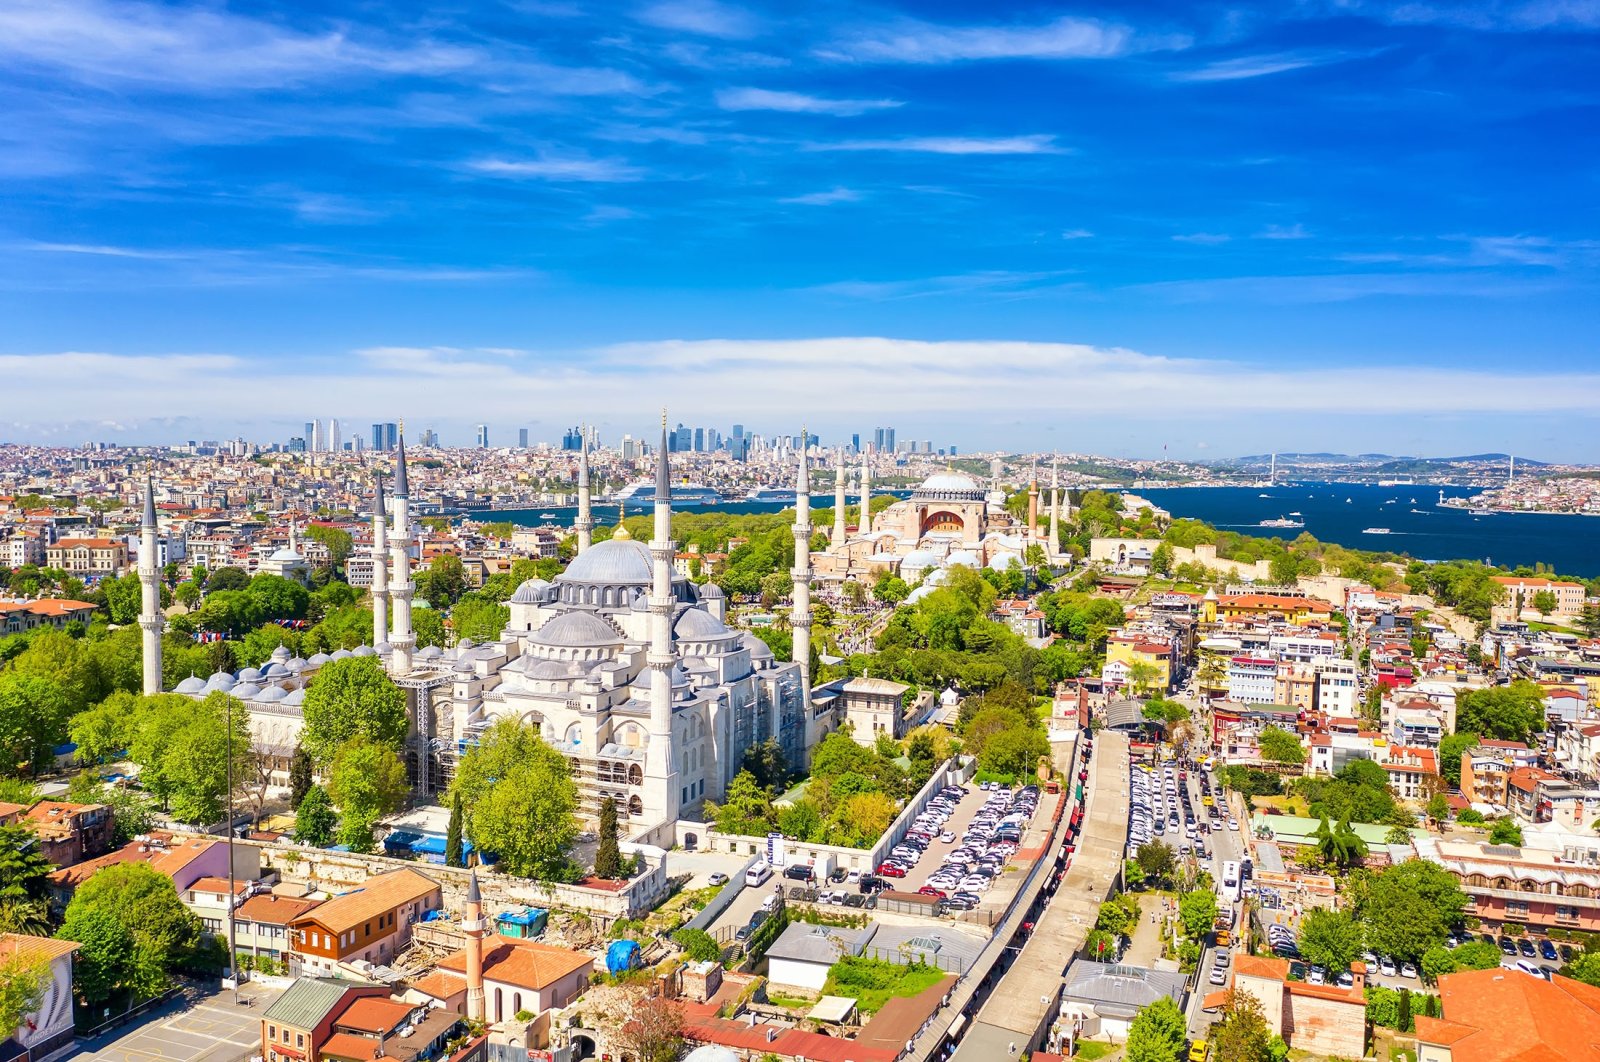 The Hagia Sophia Grand Mosque and the Blue Mosque against the Bosporus, in Istanbul, Türkiye. (Shutterstock Photo)